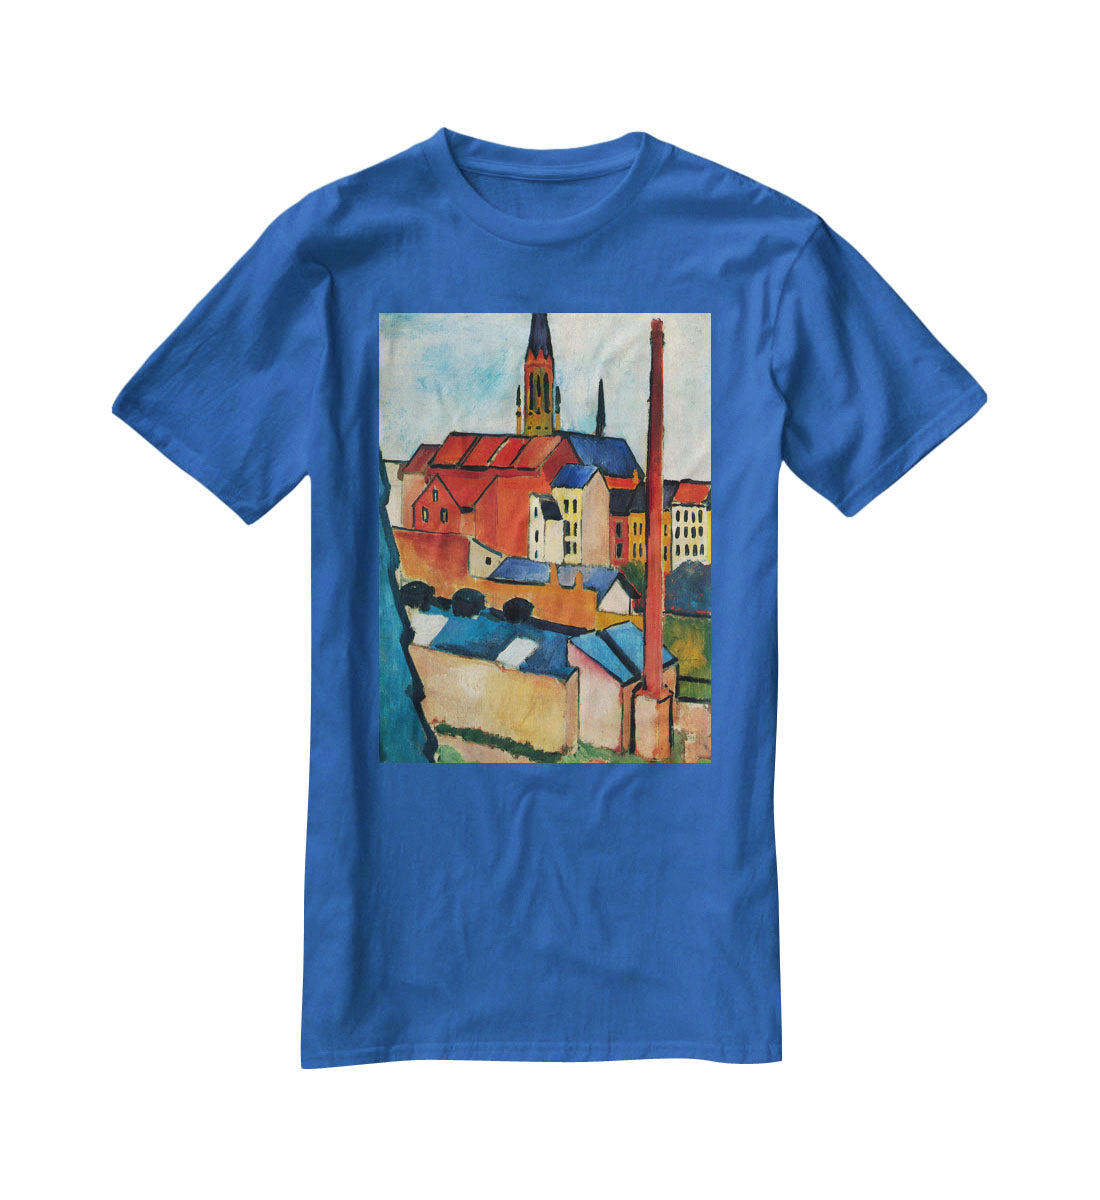 St Marys Church with houses and chimney by Macke T-Shirt - Canvas Art Rocks - 2